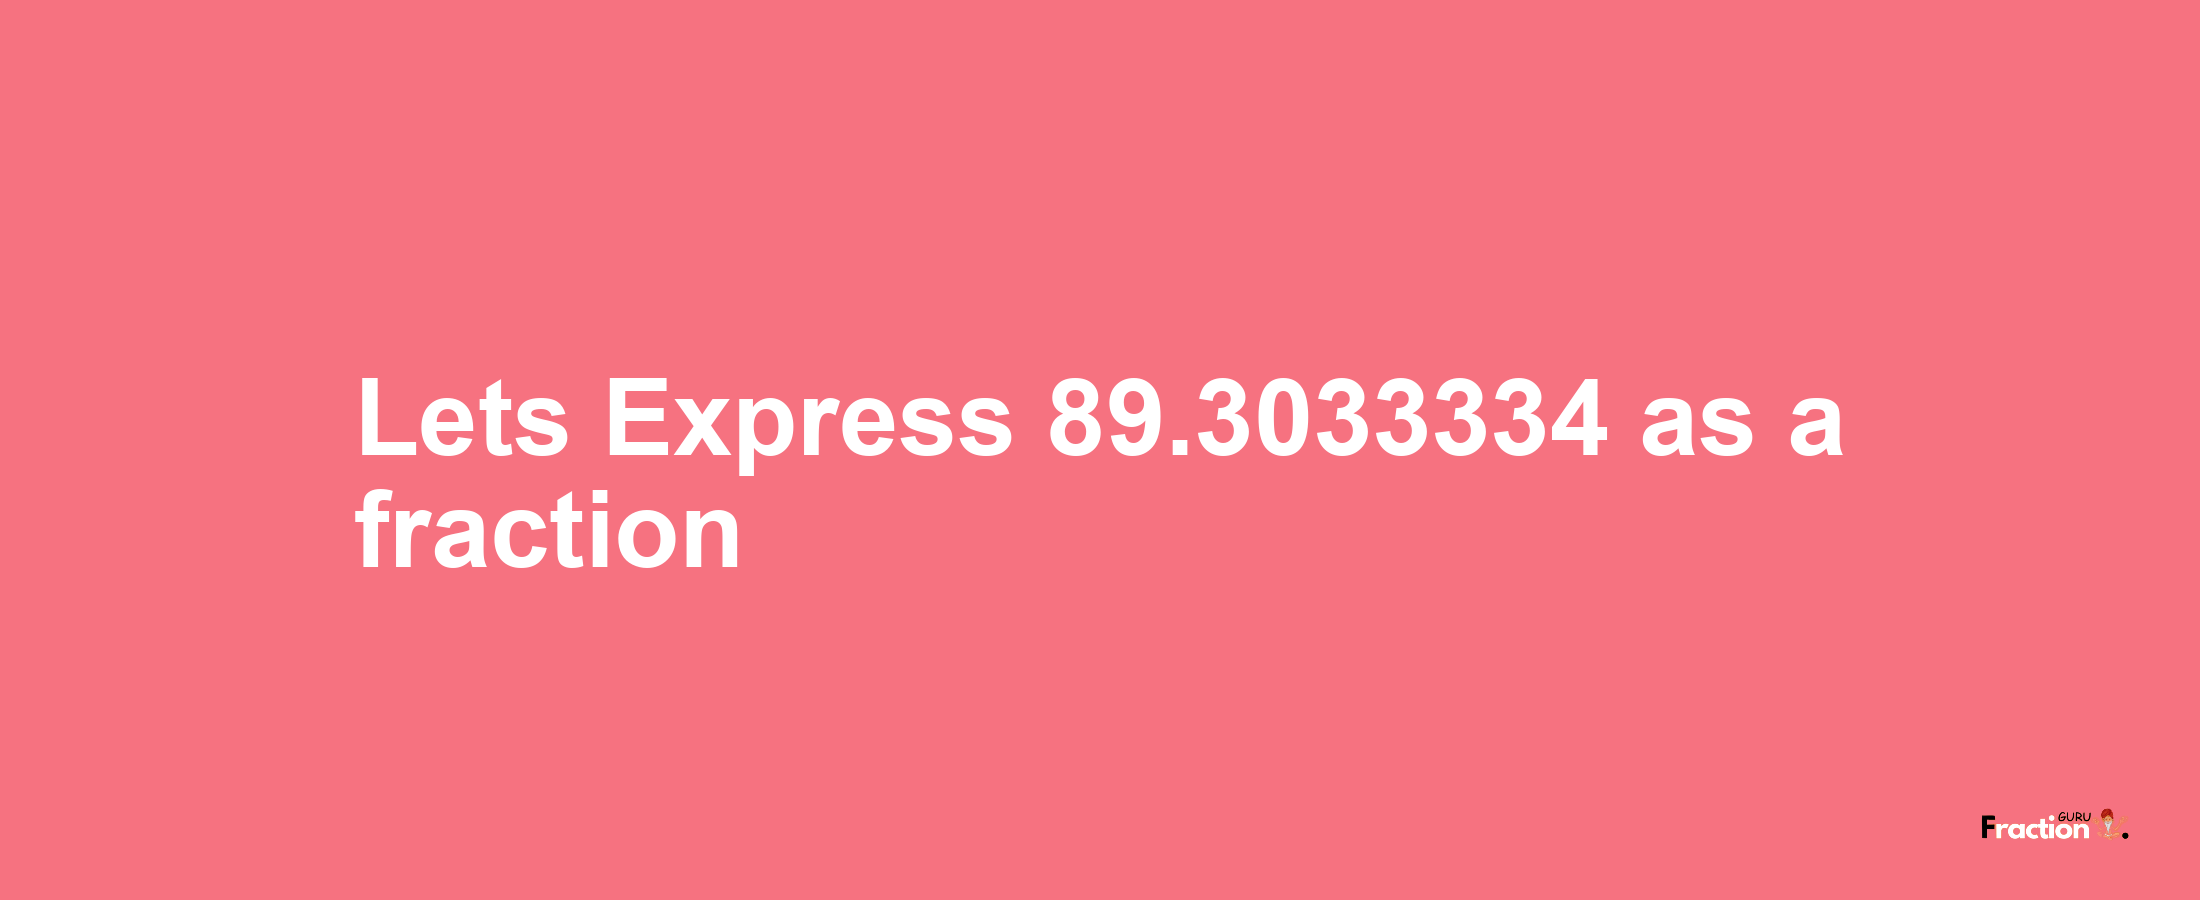 Lets Express 89.3033334 as afraction